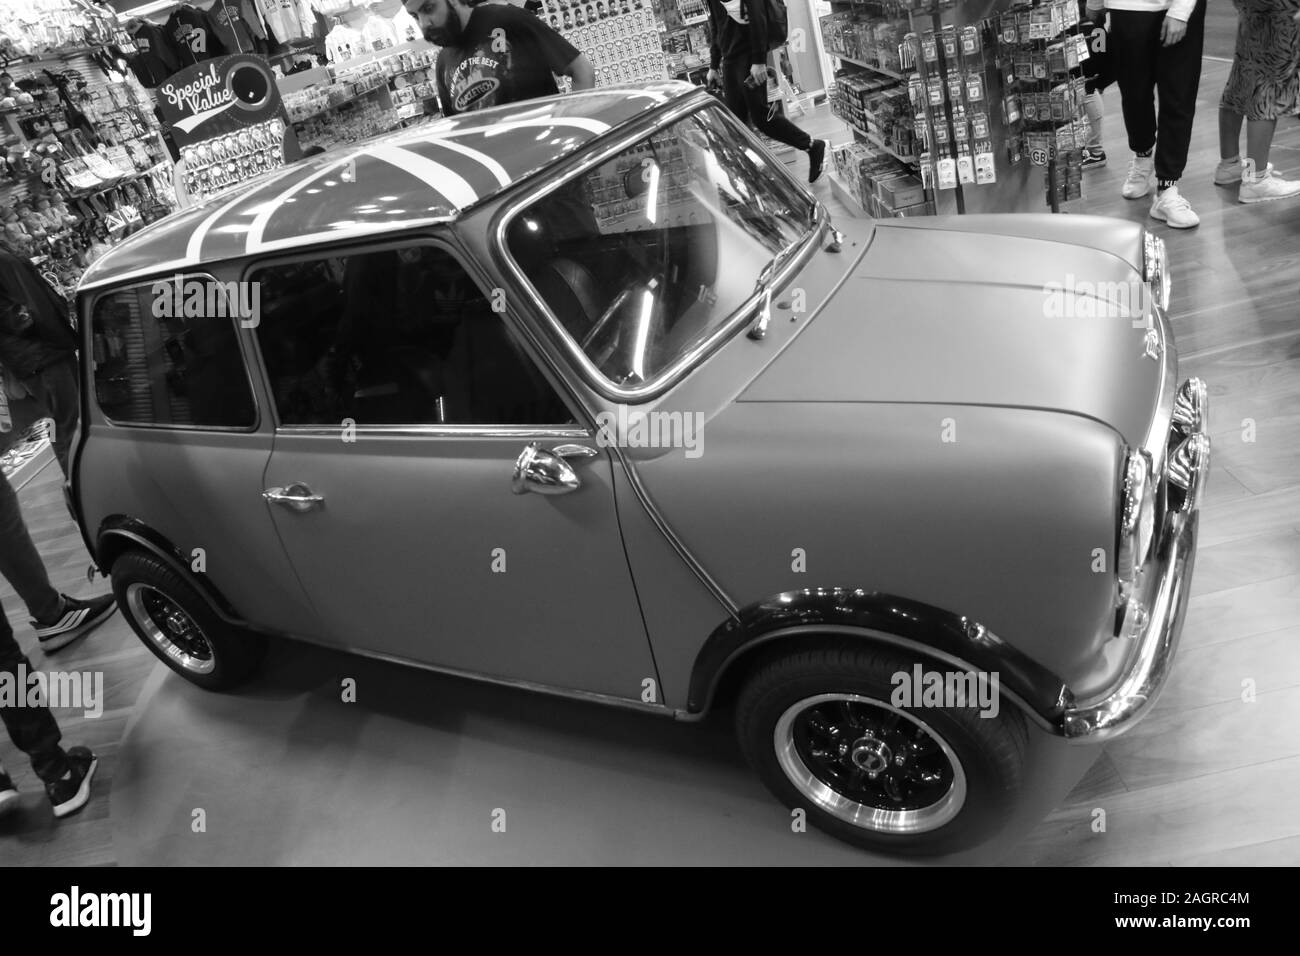 August 18, 2019 – Embankment, London, United Kingdom. An iconic and tiny British car, the Mini, sits on display in a small shop in the middle of Londo Stock Photo